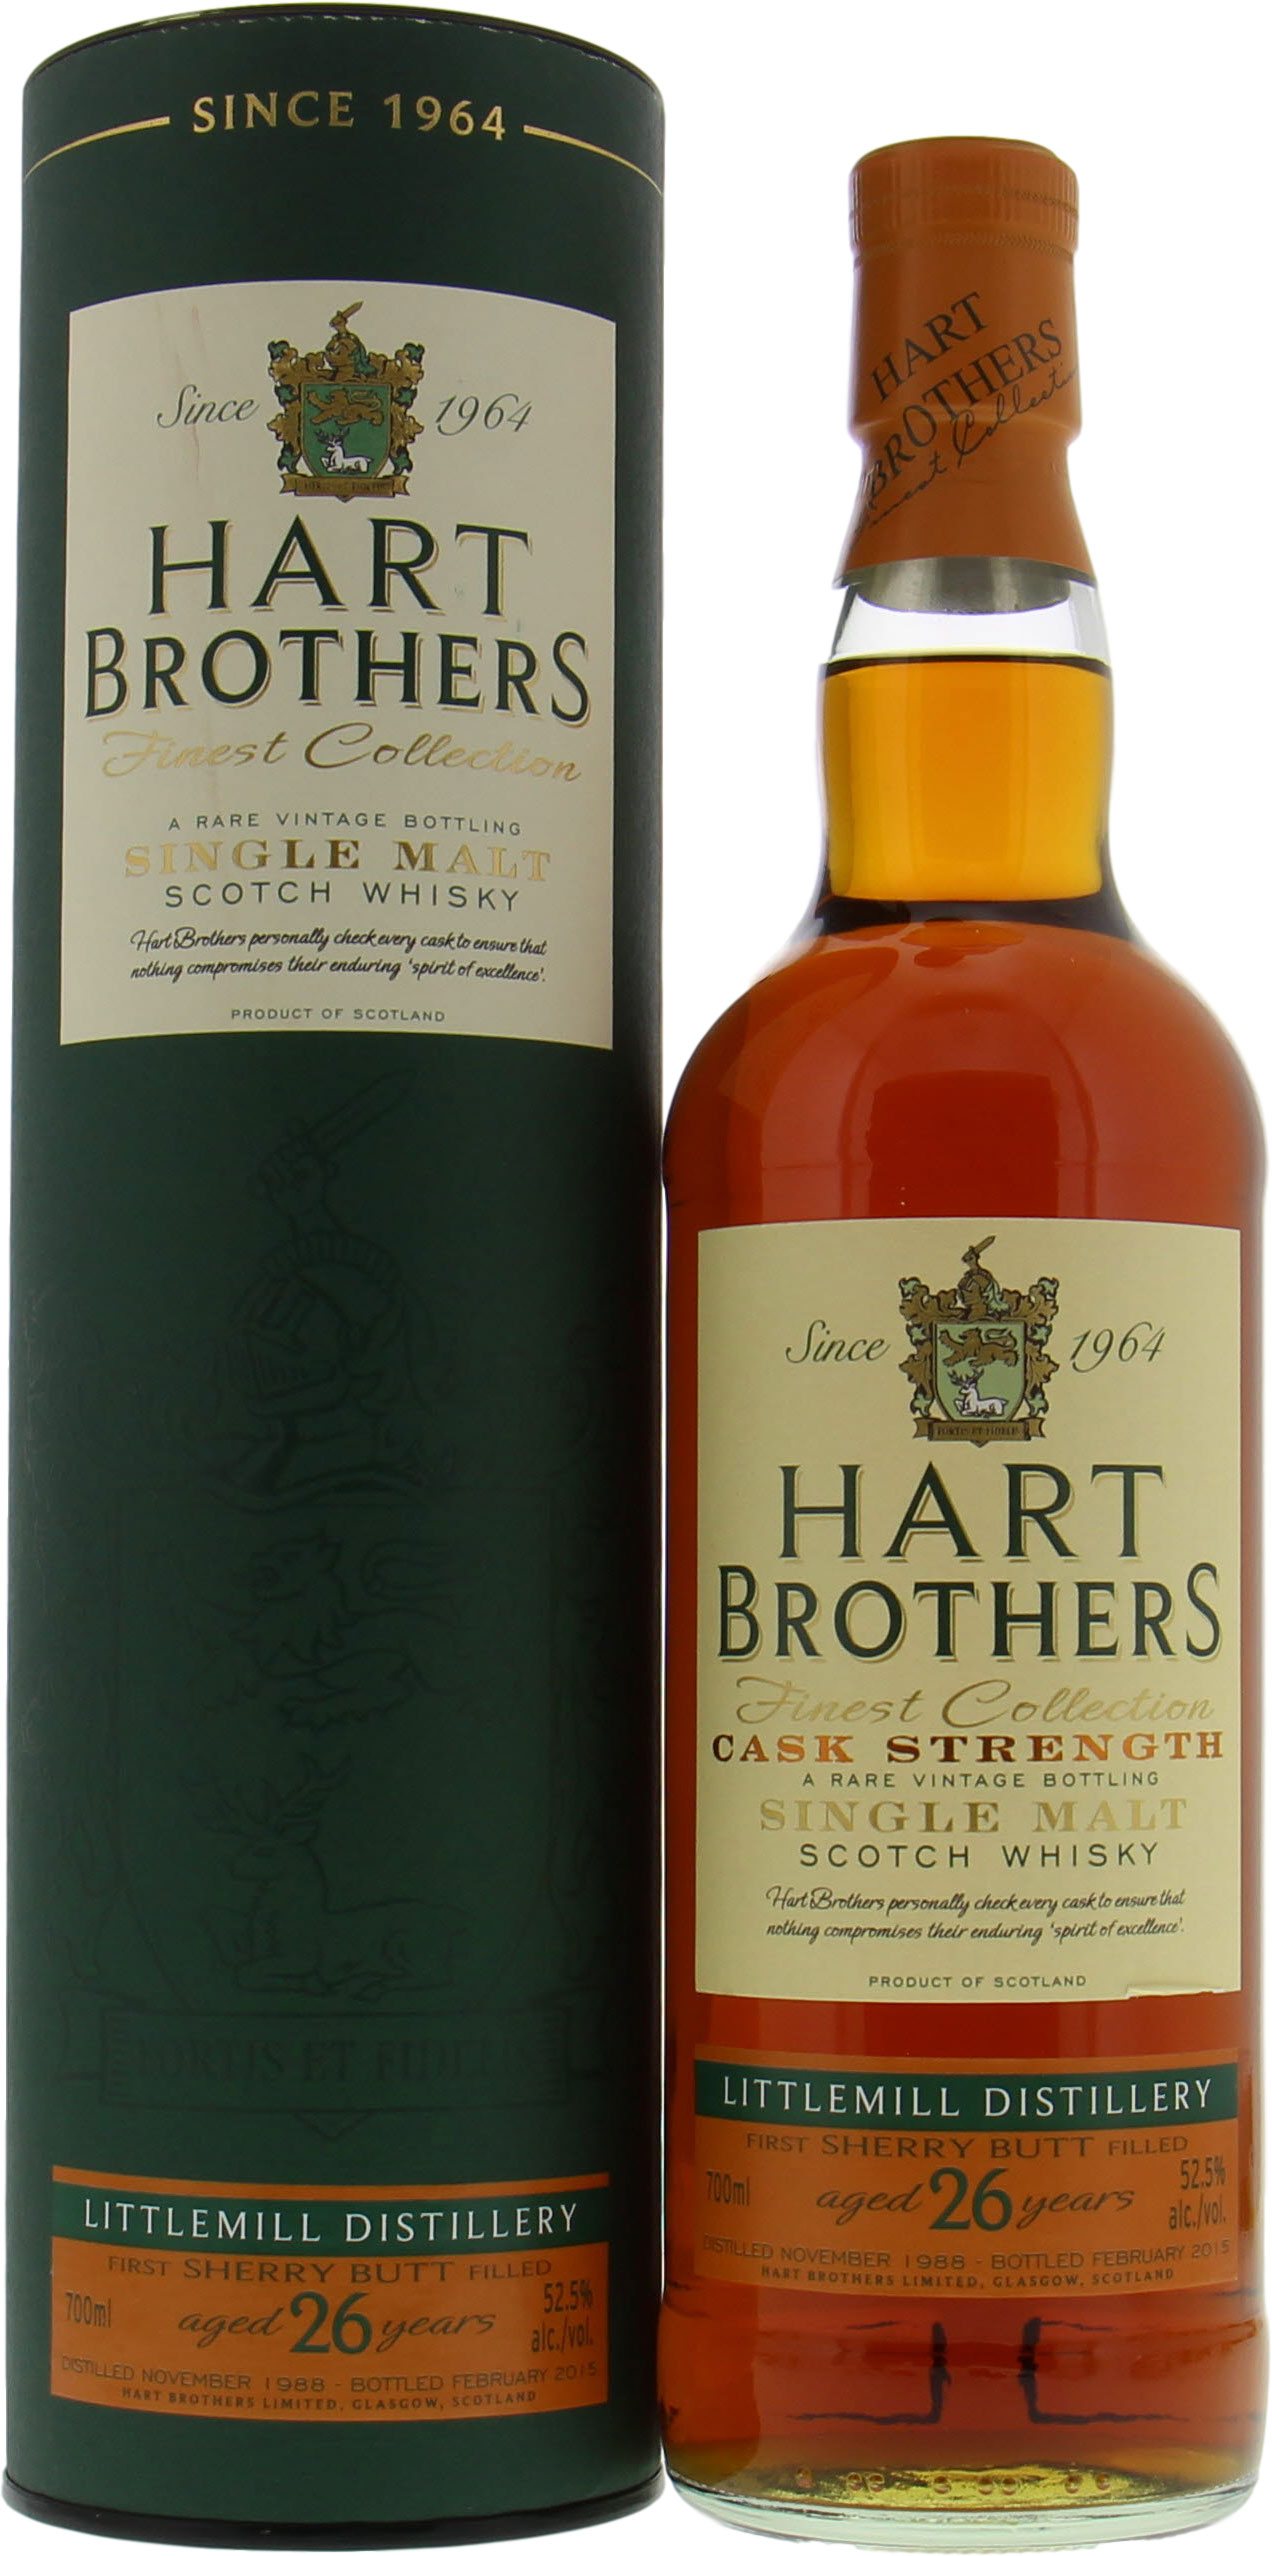 Littlemill - 26 Years Old Hart Brothers Sherry Butt Cask Strength 52.5% 1988 In Original Container